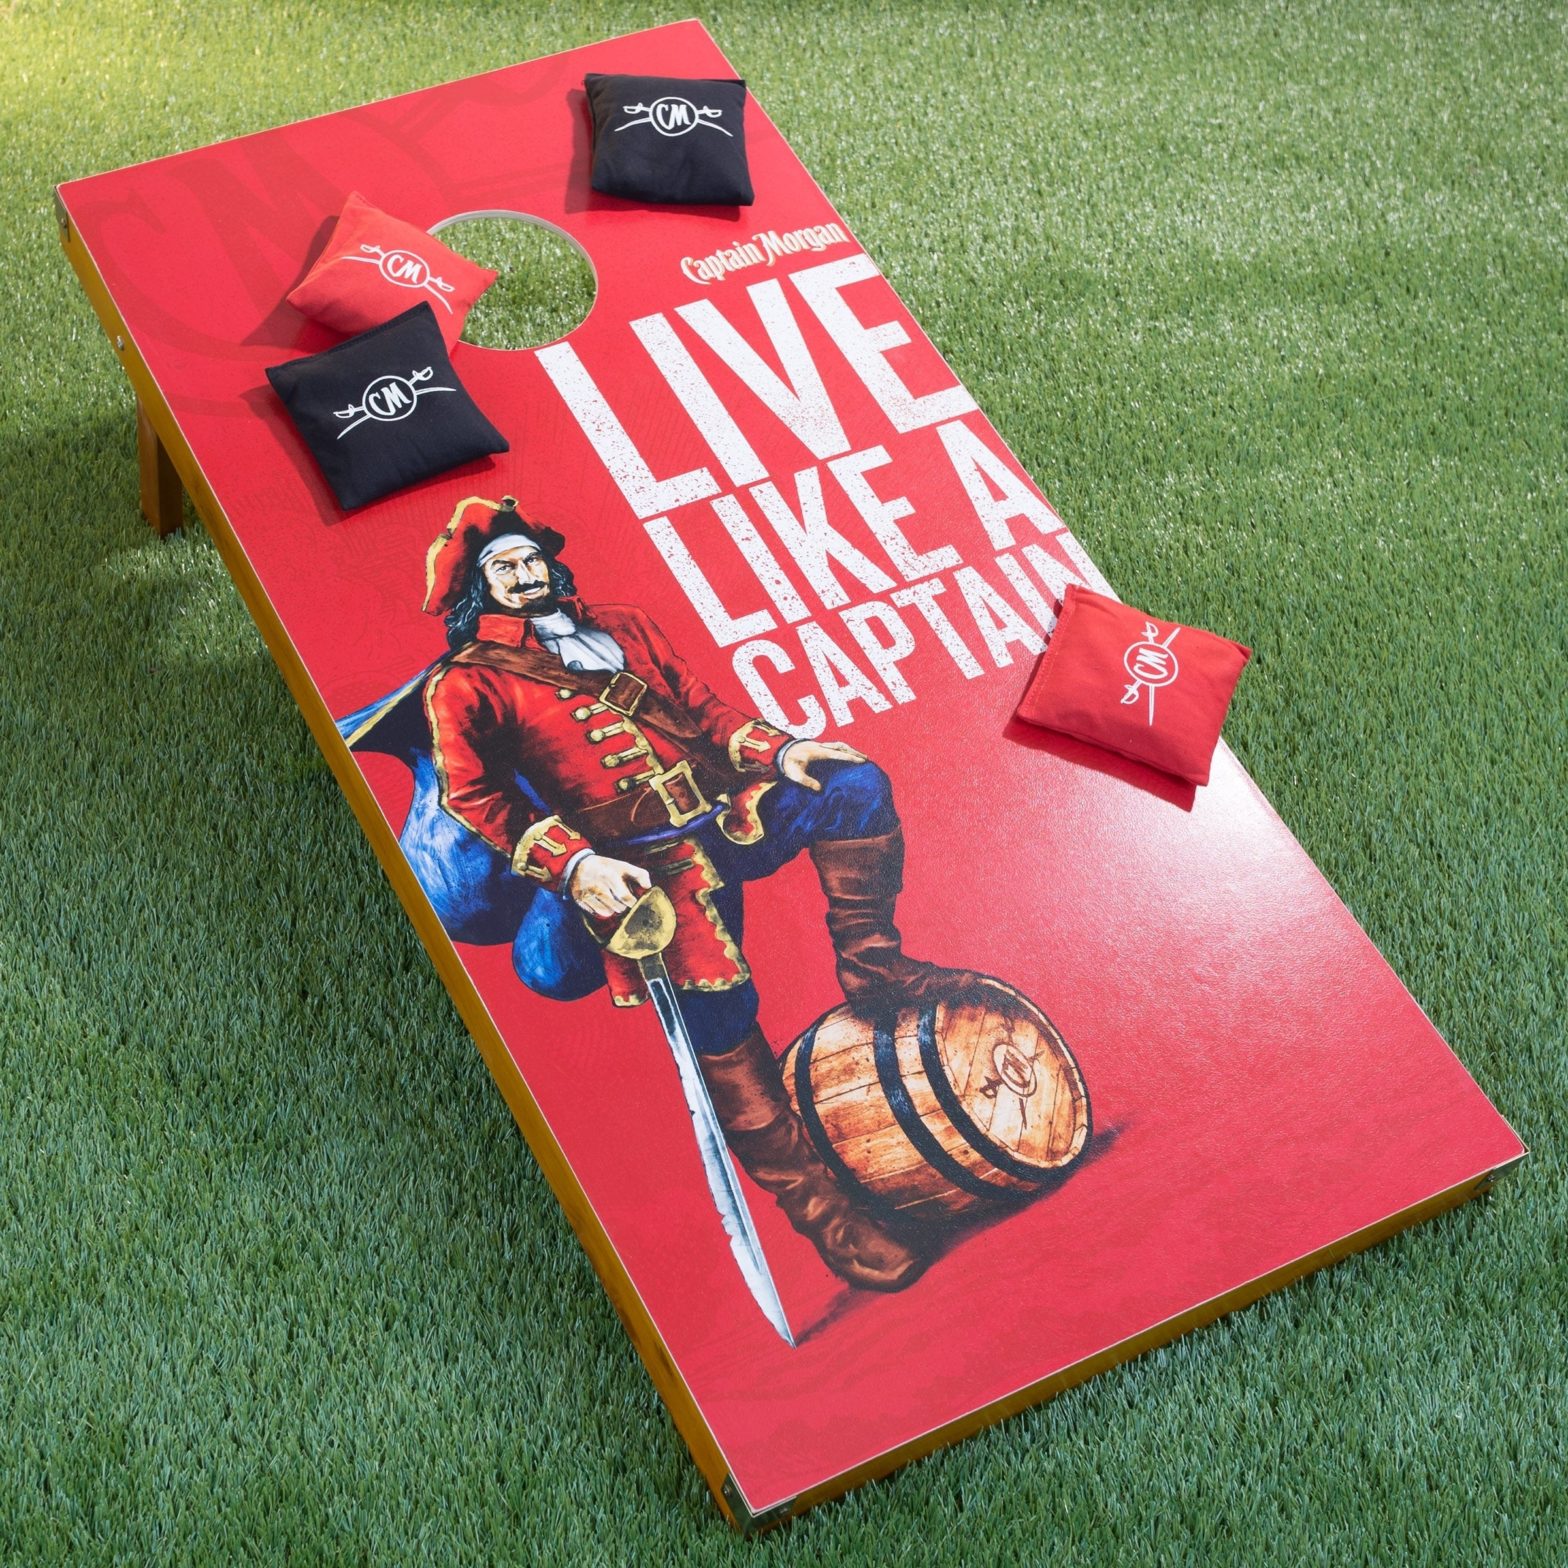 company branded corn hole game board, with matching bean bags for tossing. depicting pirate